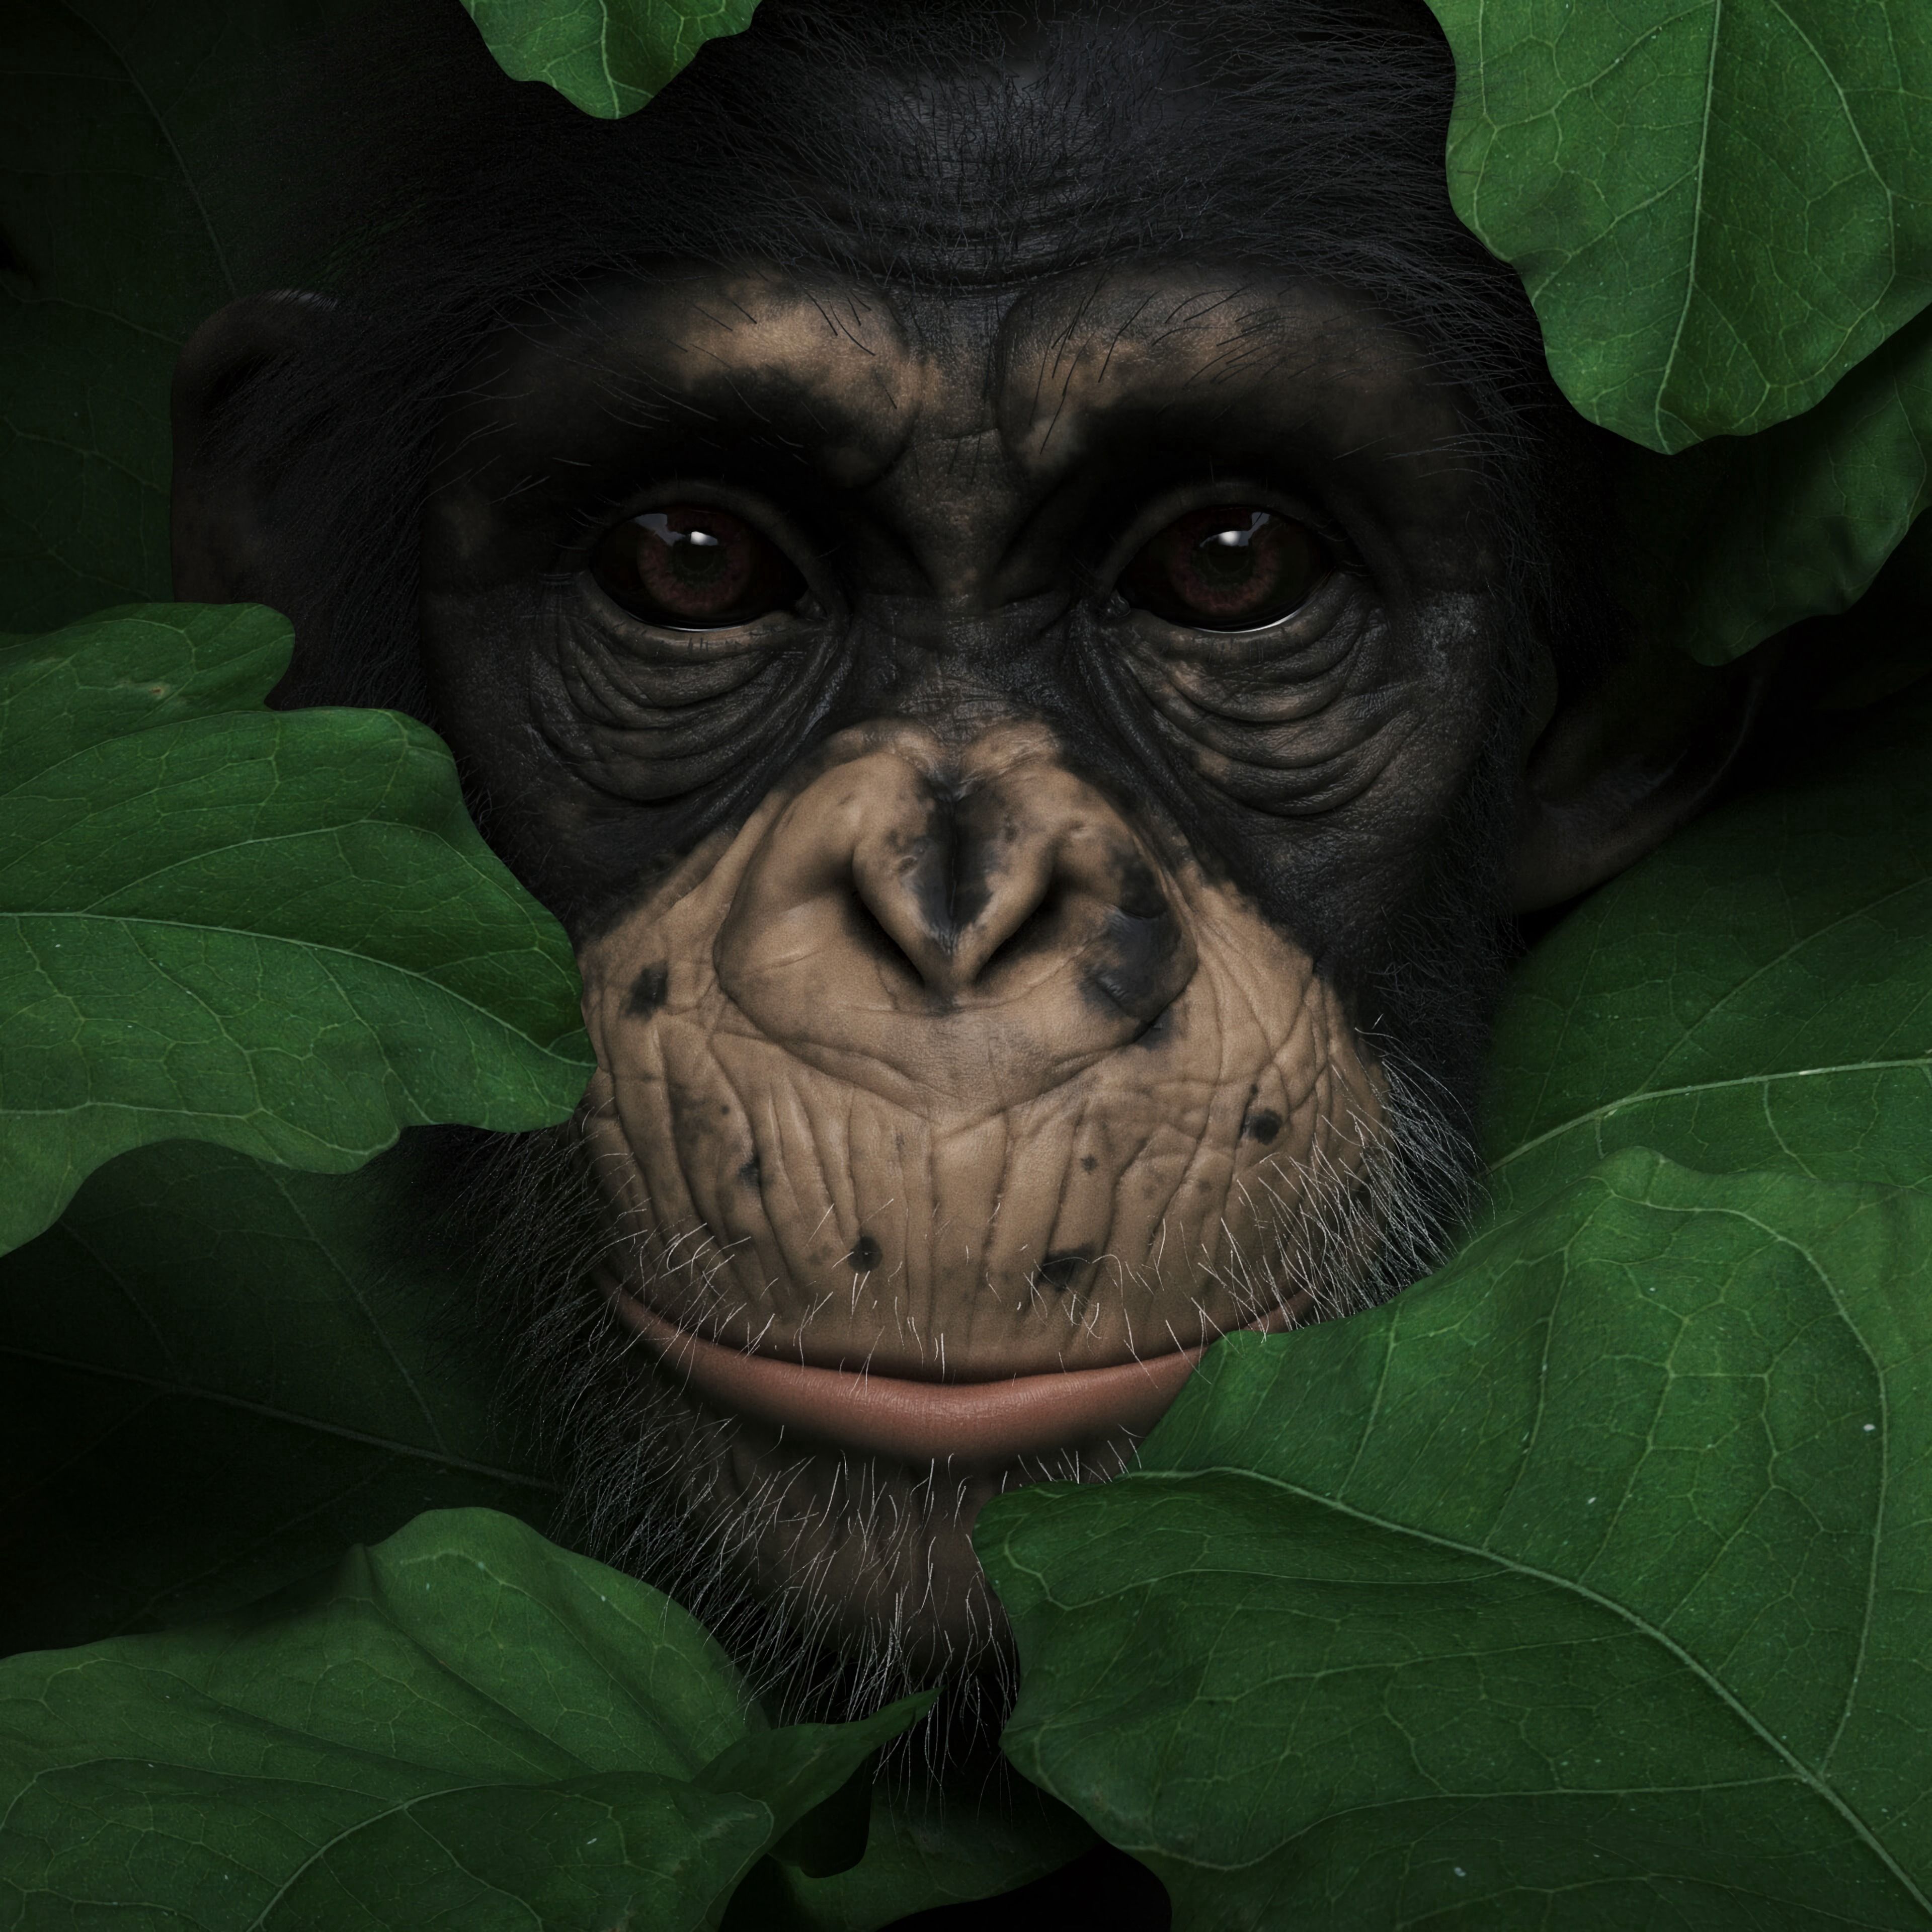 97072 download wallpaper 3d, animals, leaves, muzzle, monkey, portrait screensavers and pictures for free